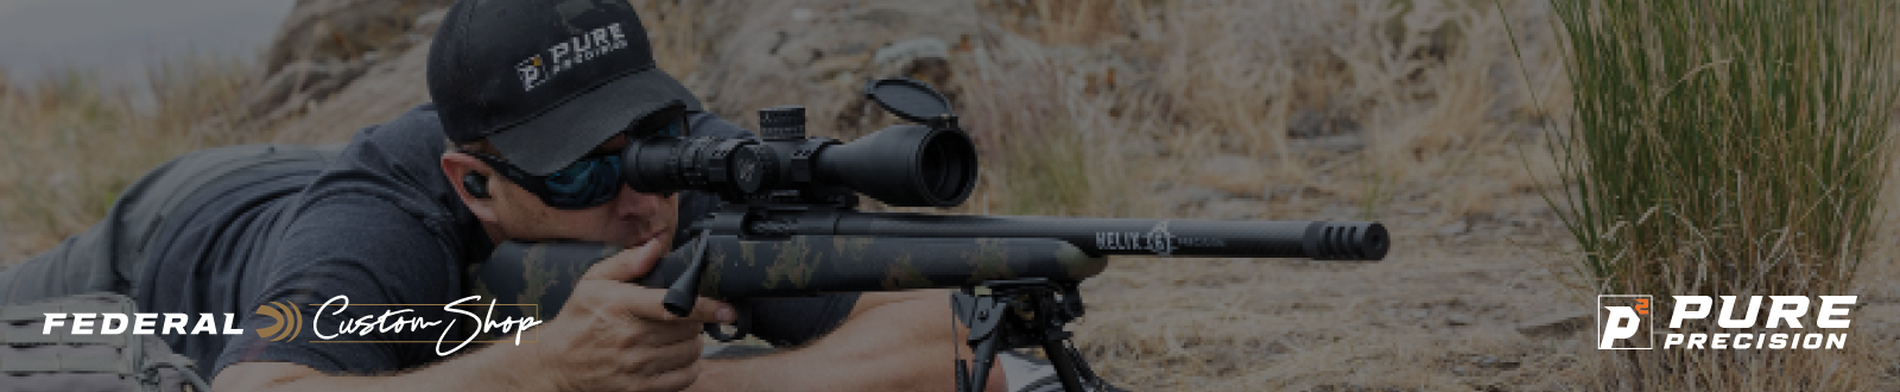 hunter looking down the scope of a rifle resting on a bipod with the Pure Precision model and Federal Logos